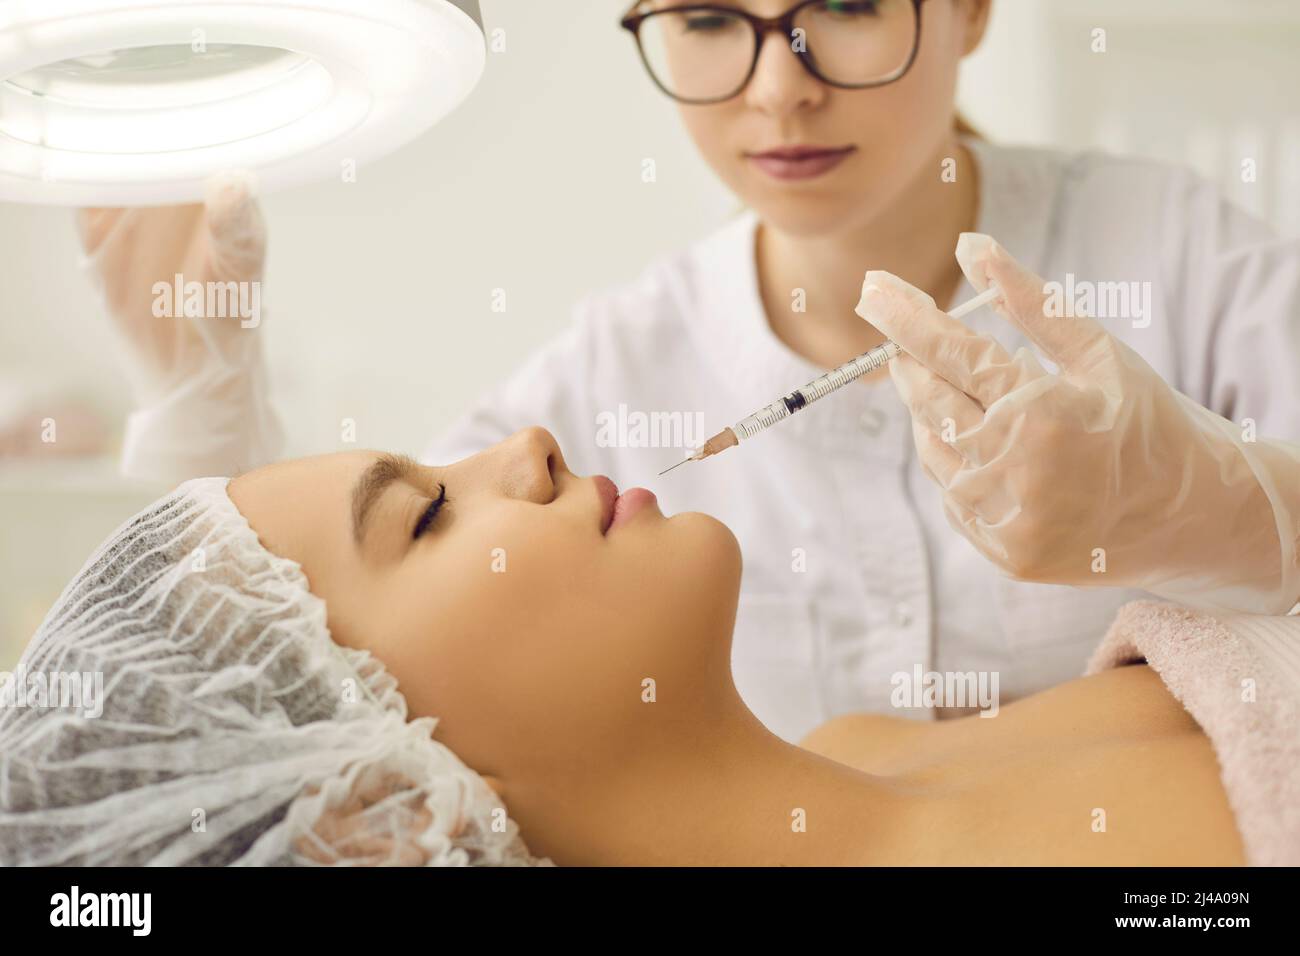 Cosmetologist performs rejuvenating facial injection procedure for her female client. Stock Photo